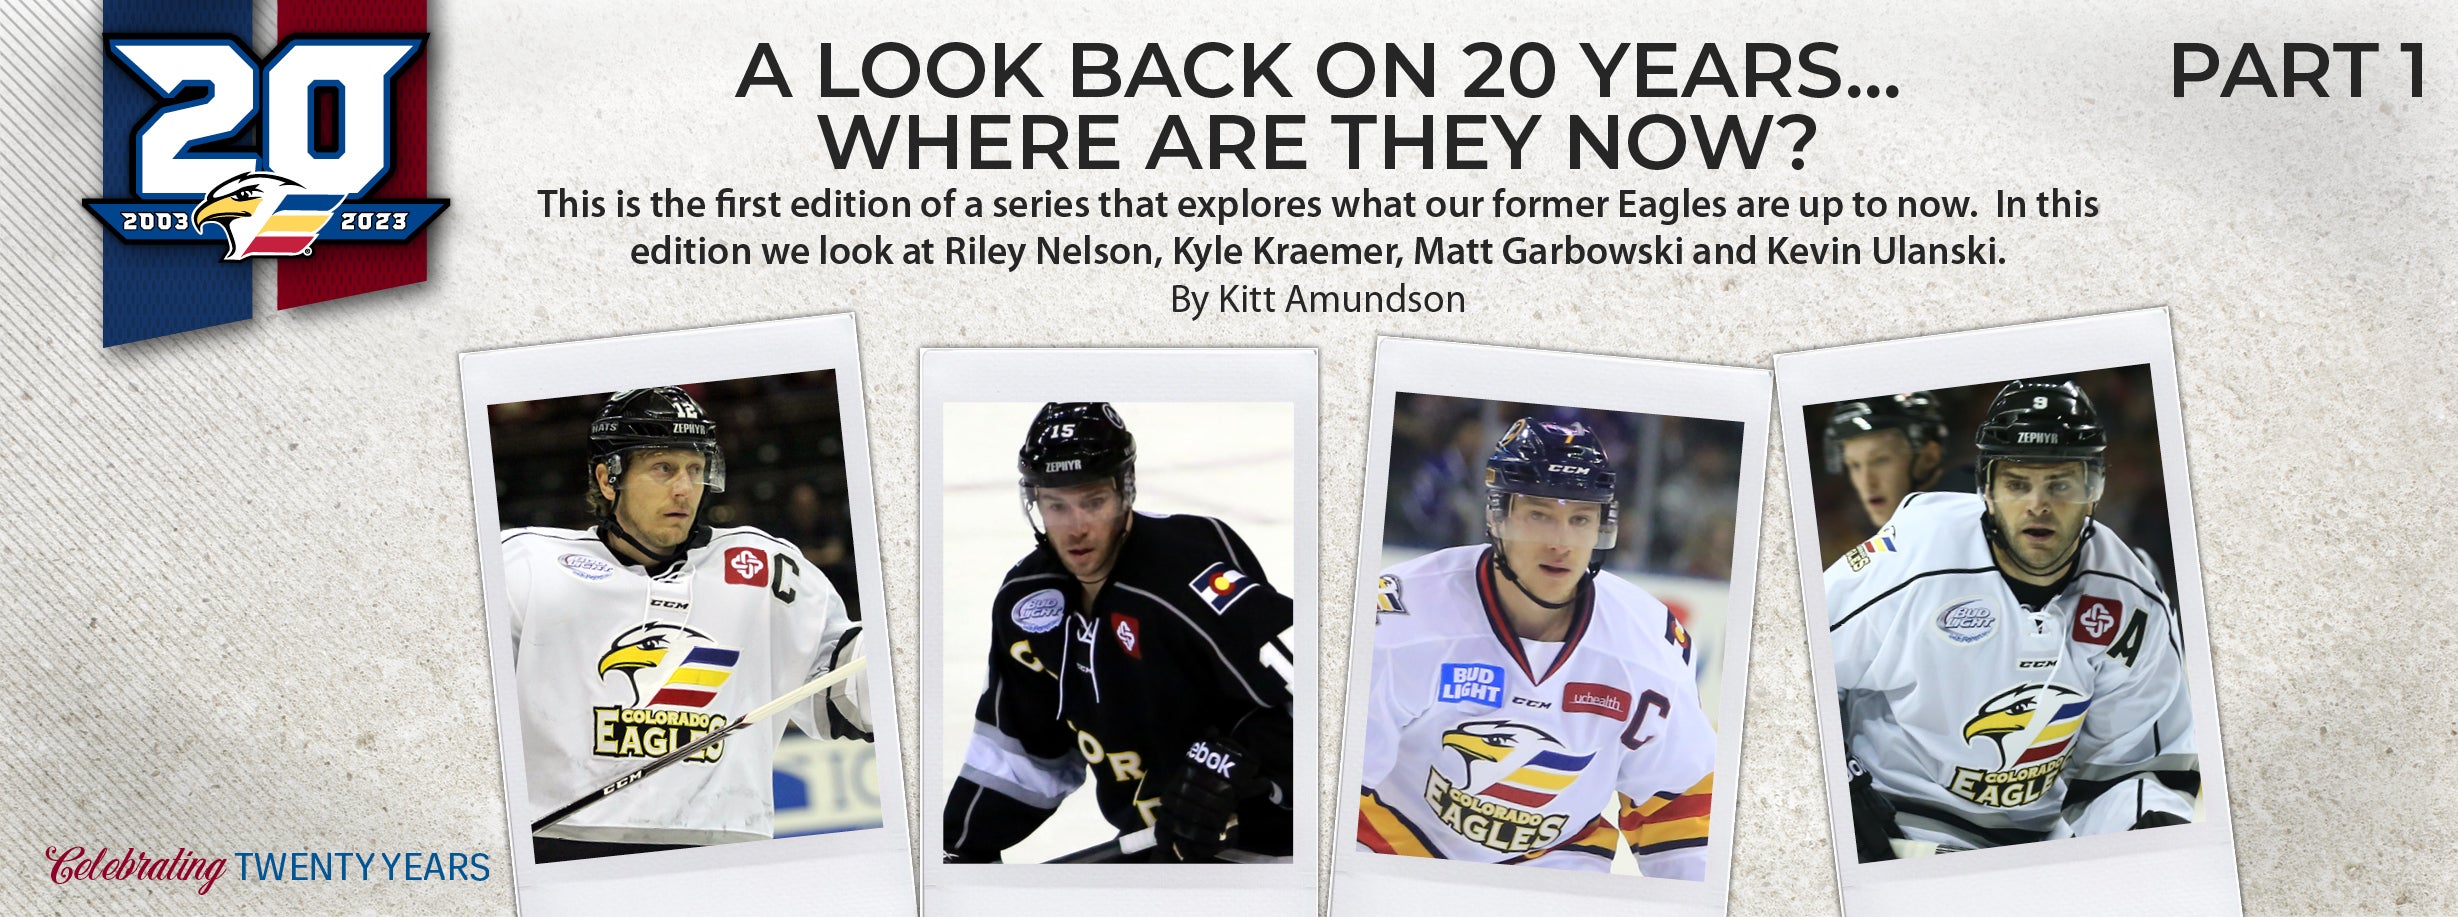 A Look Back On 20 Years...Where are they now?